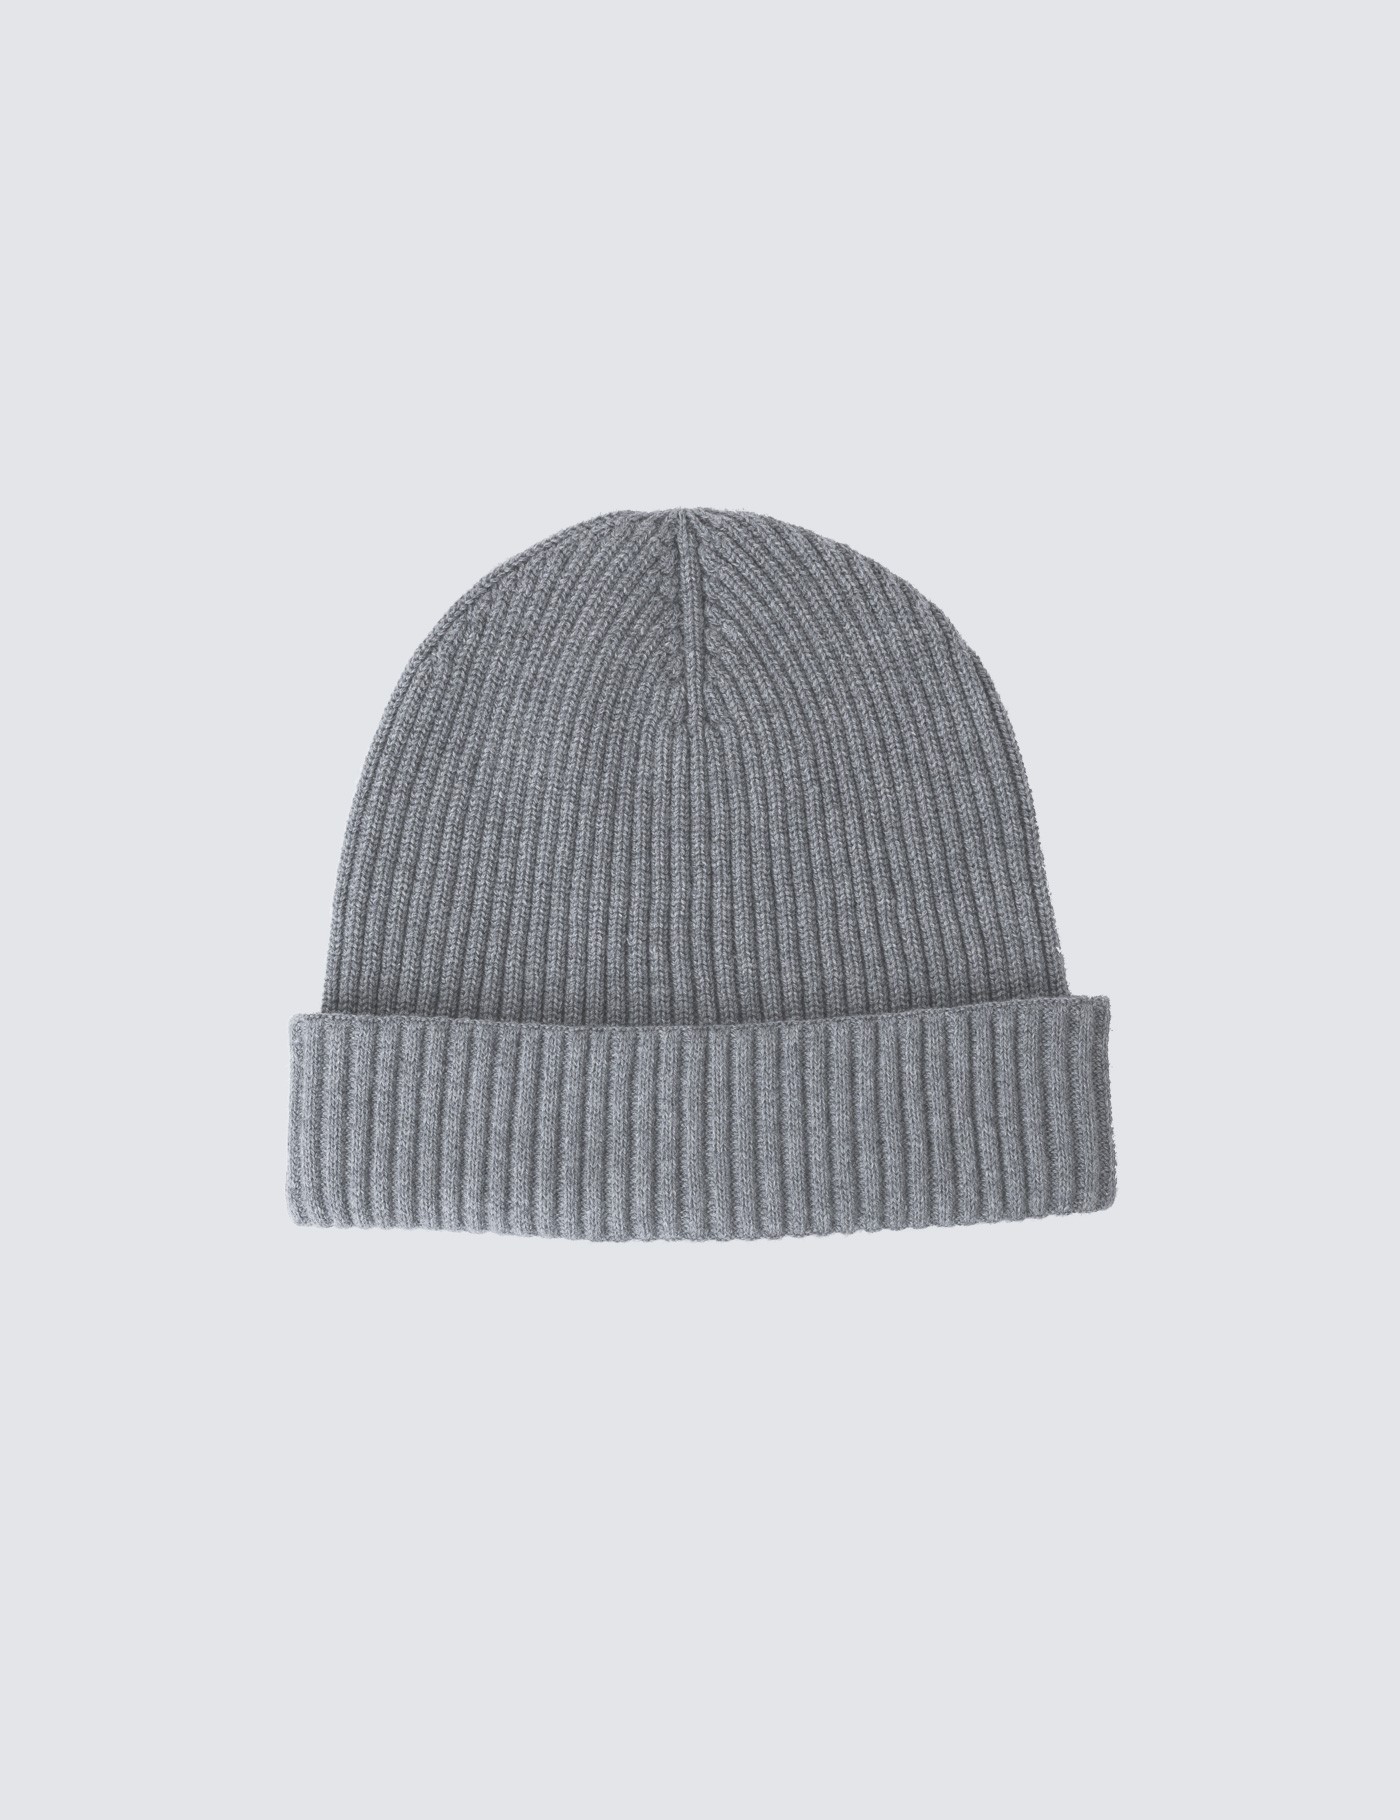 hawes & curtis men’s grey ribbed knitted beanie